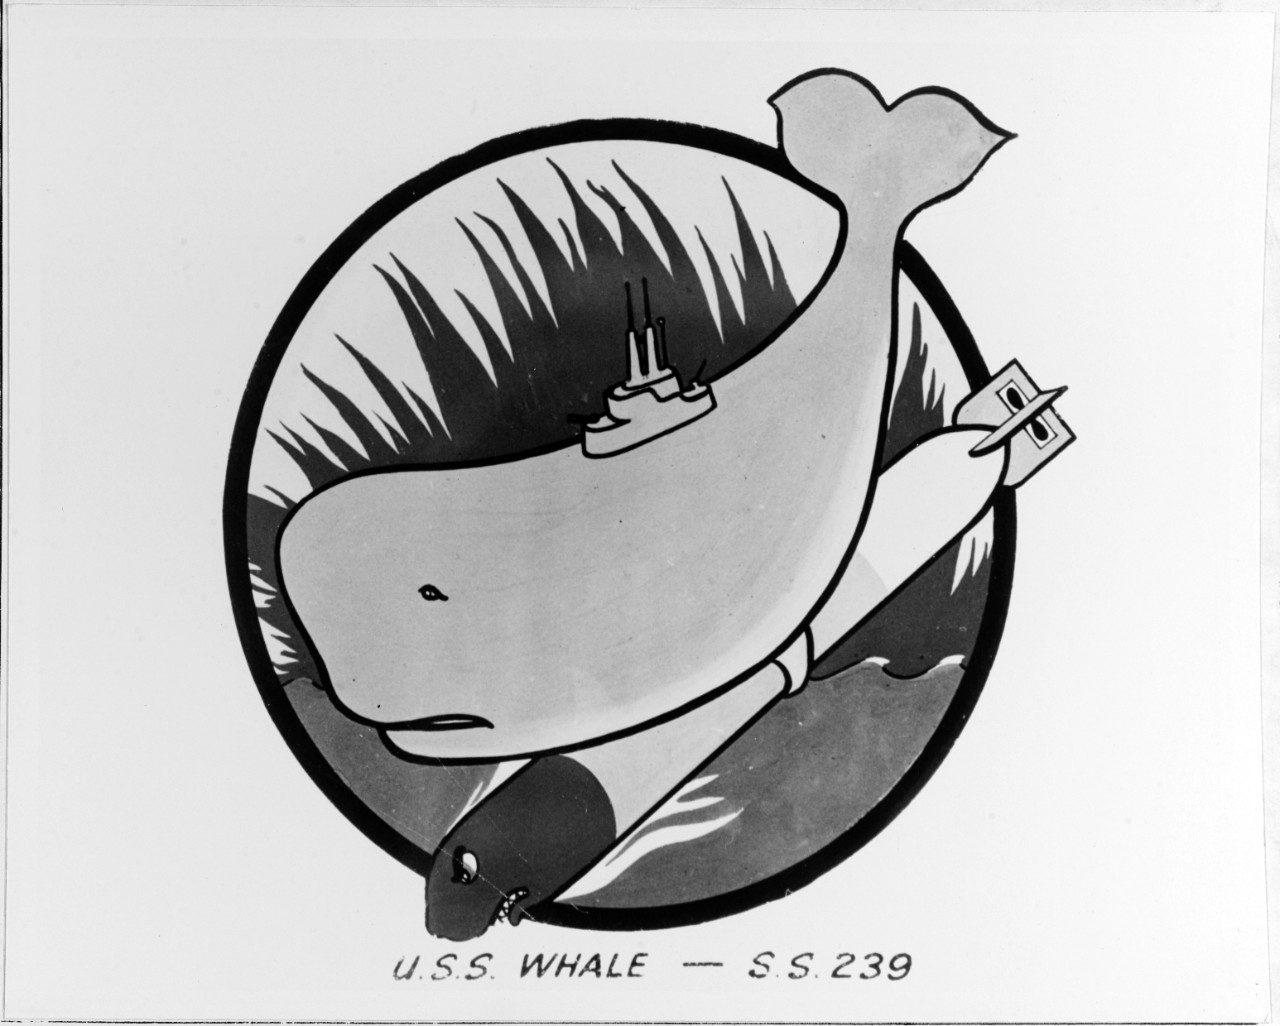 Insignia:  USS WHALE (SS-239)